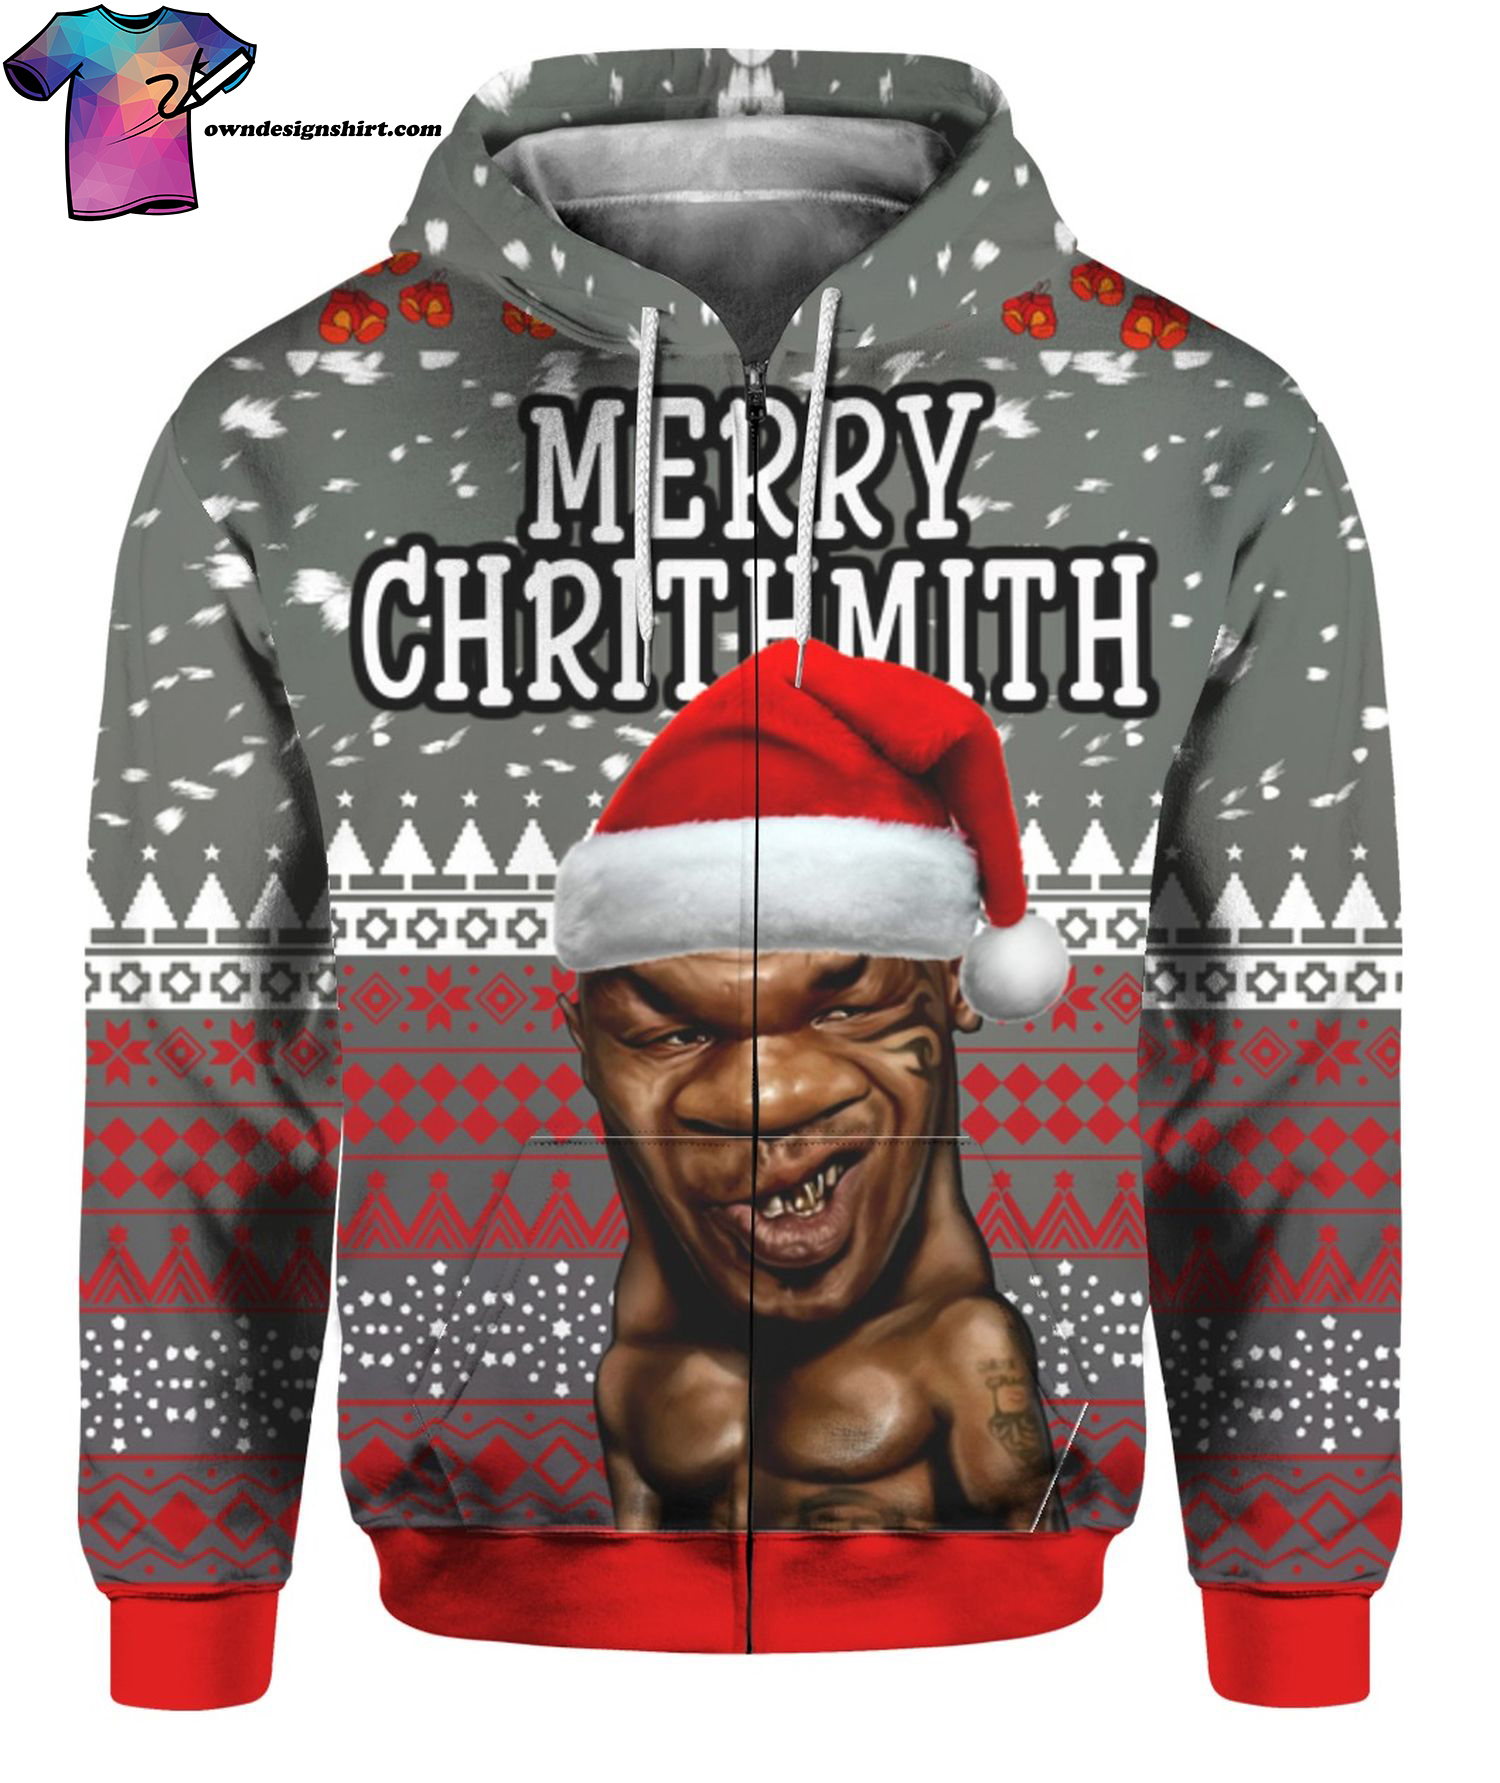 Mike Tyson Merry Chrithmith Full Print Ugly Christmas Sweater